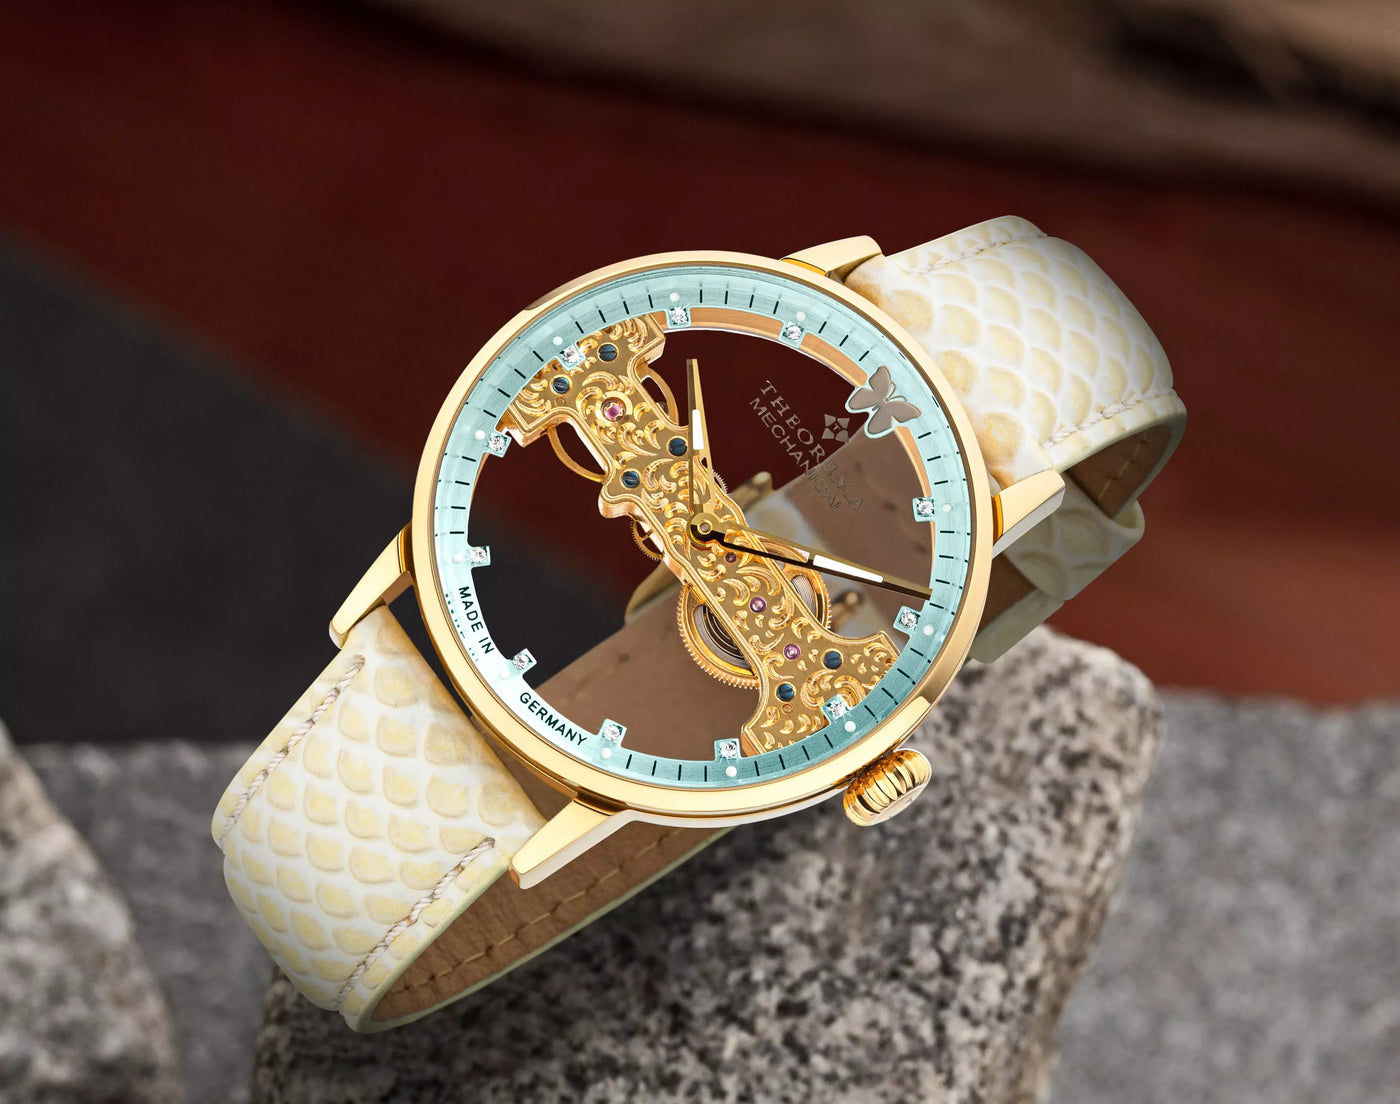 Perfect for enthusiasts in female luxury watches that want to make a style statement.